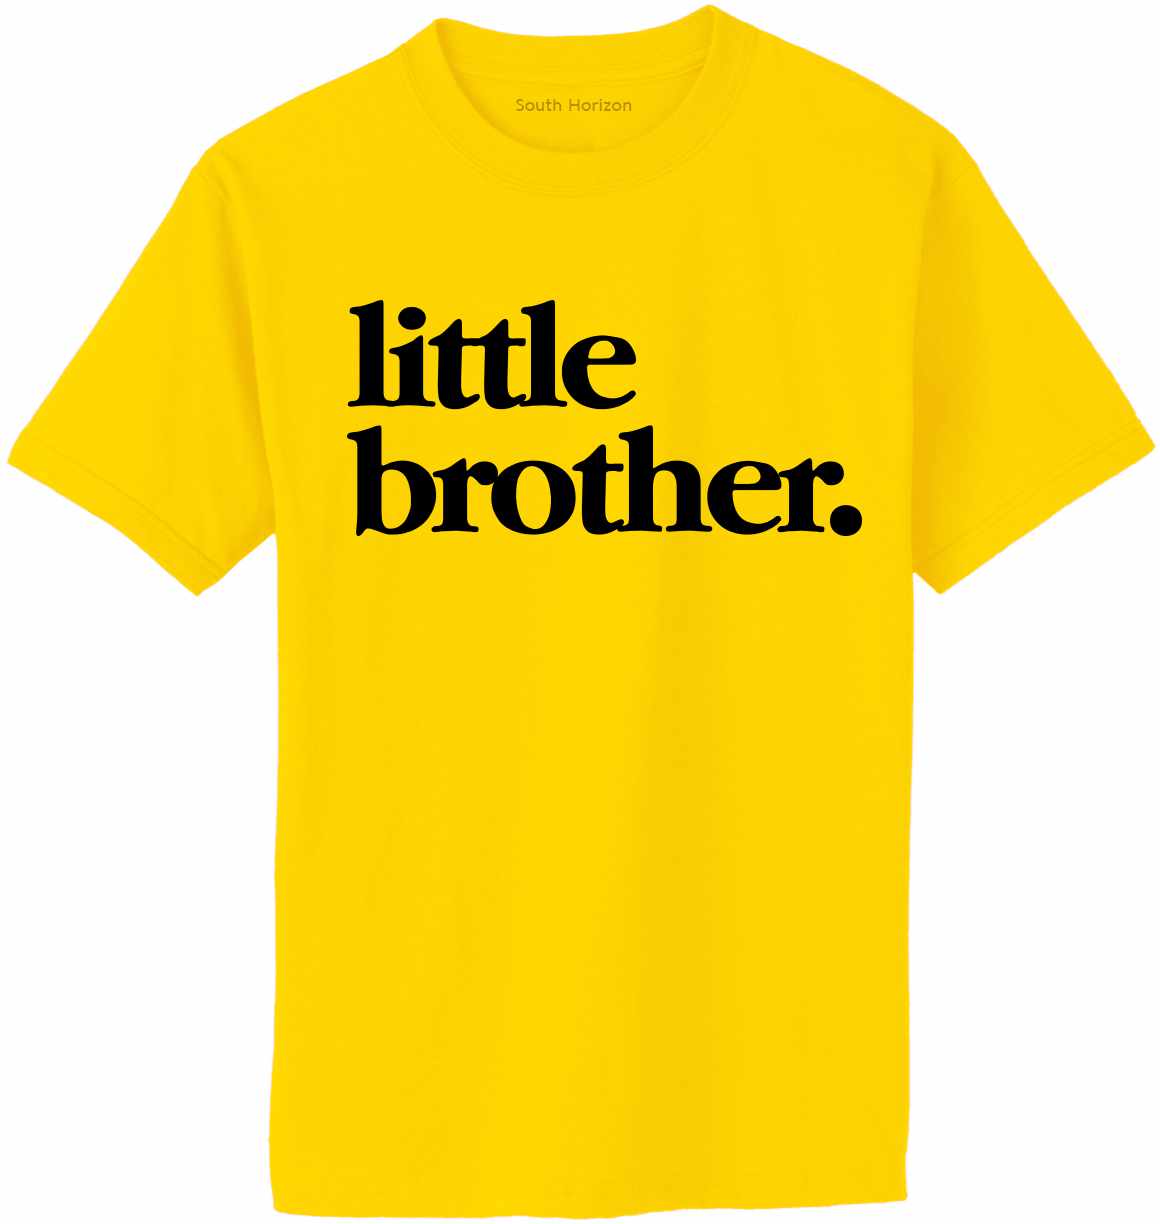 Little Brother on Adult T-Shirt (#1322-1)